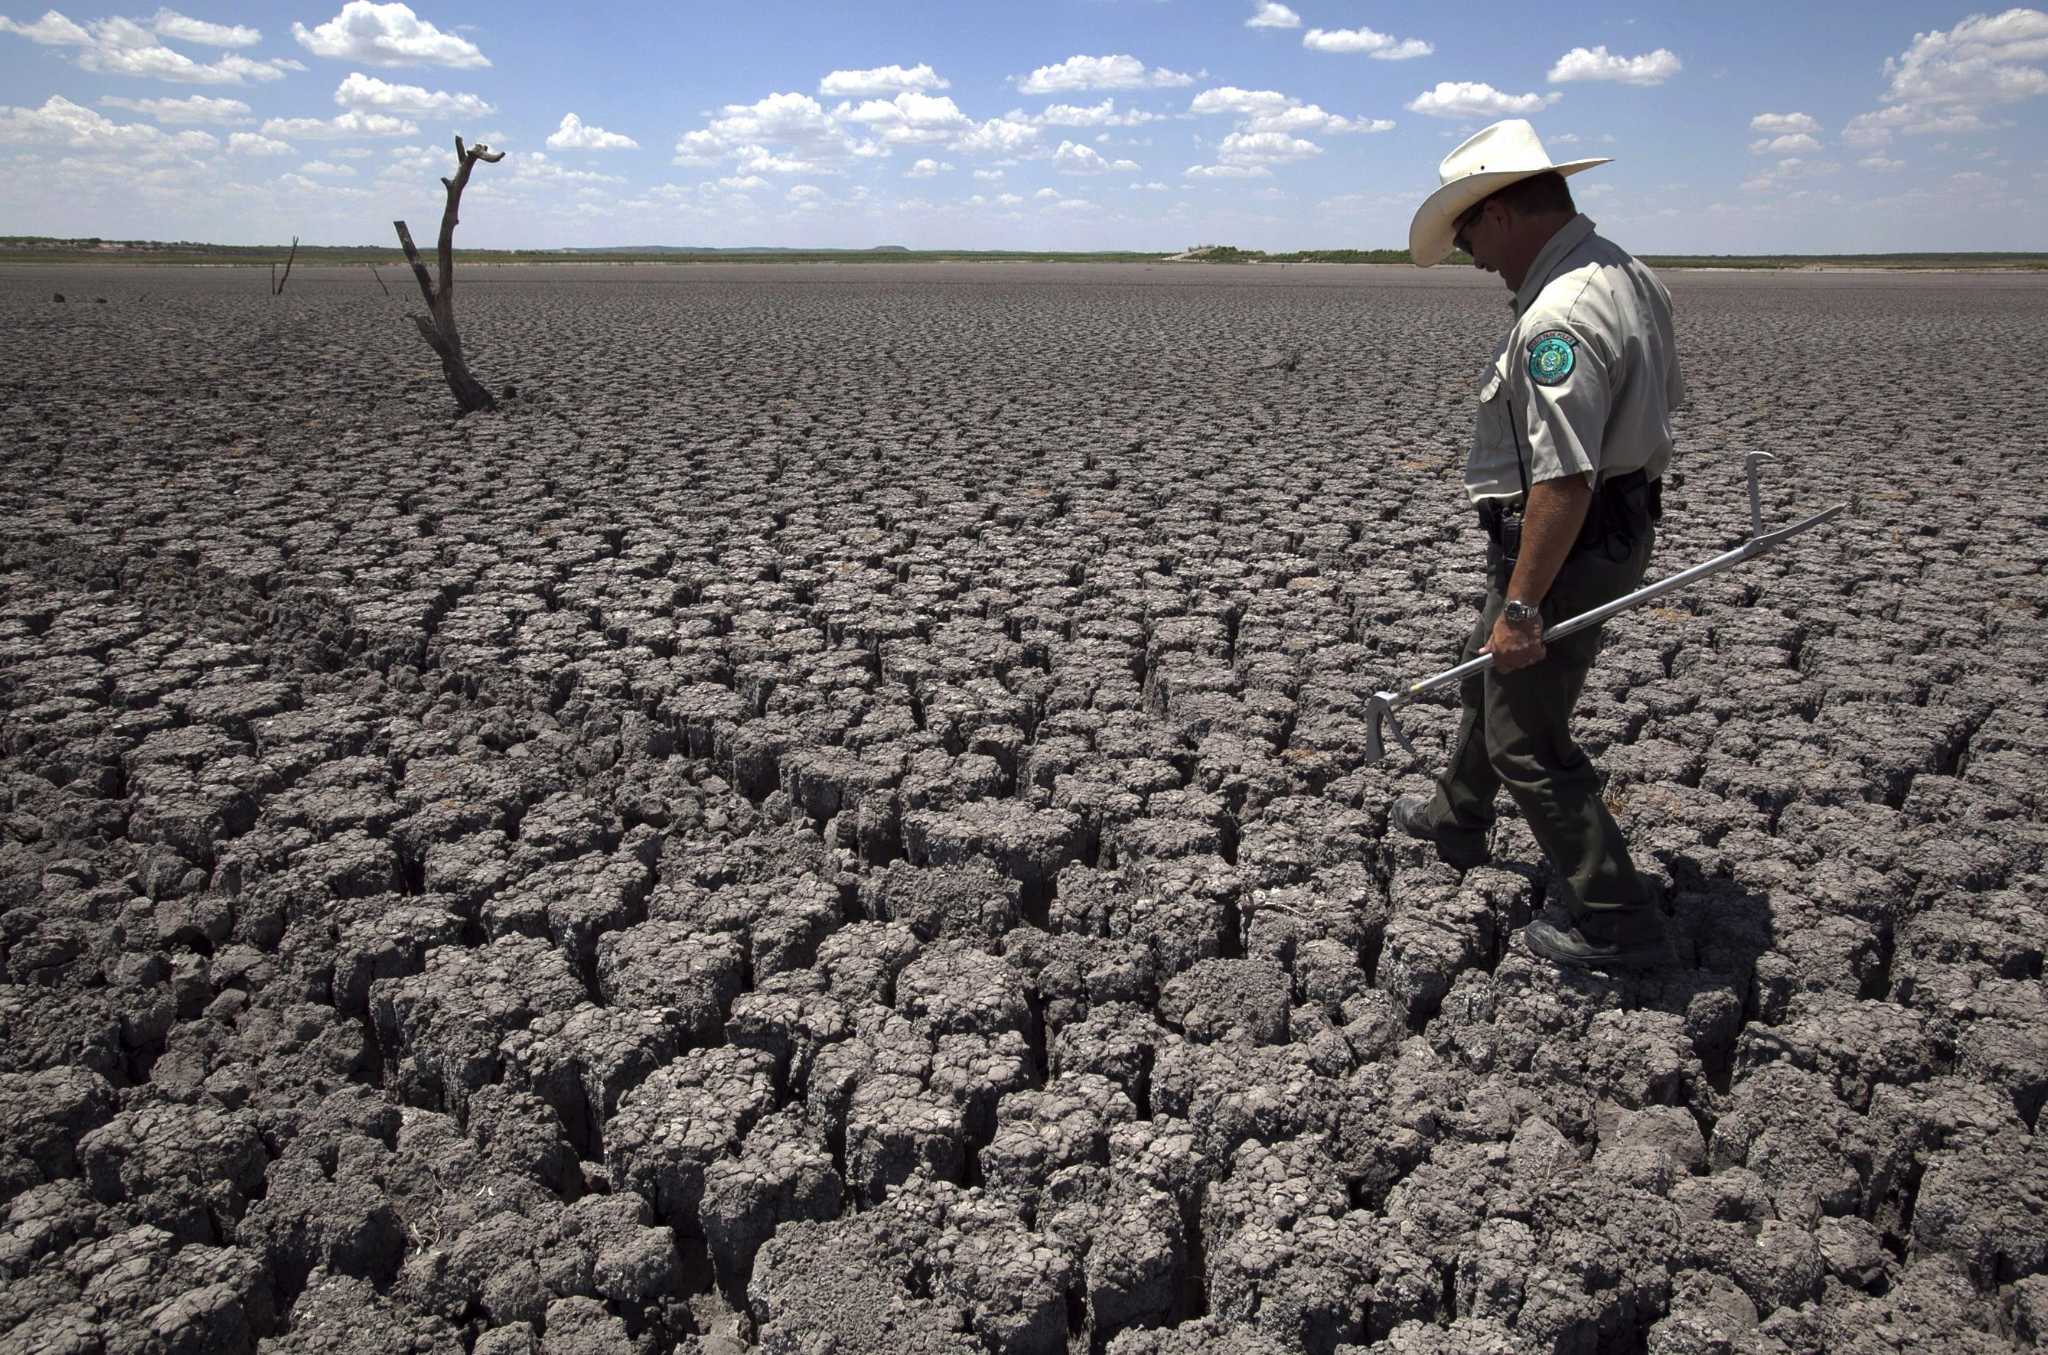 ‘Mega-drought’ could be in store for Texas, western U.S. - San Antonio Express-News